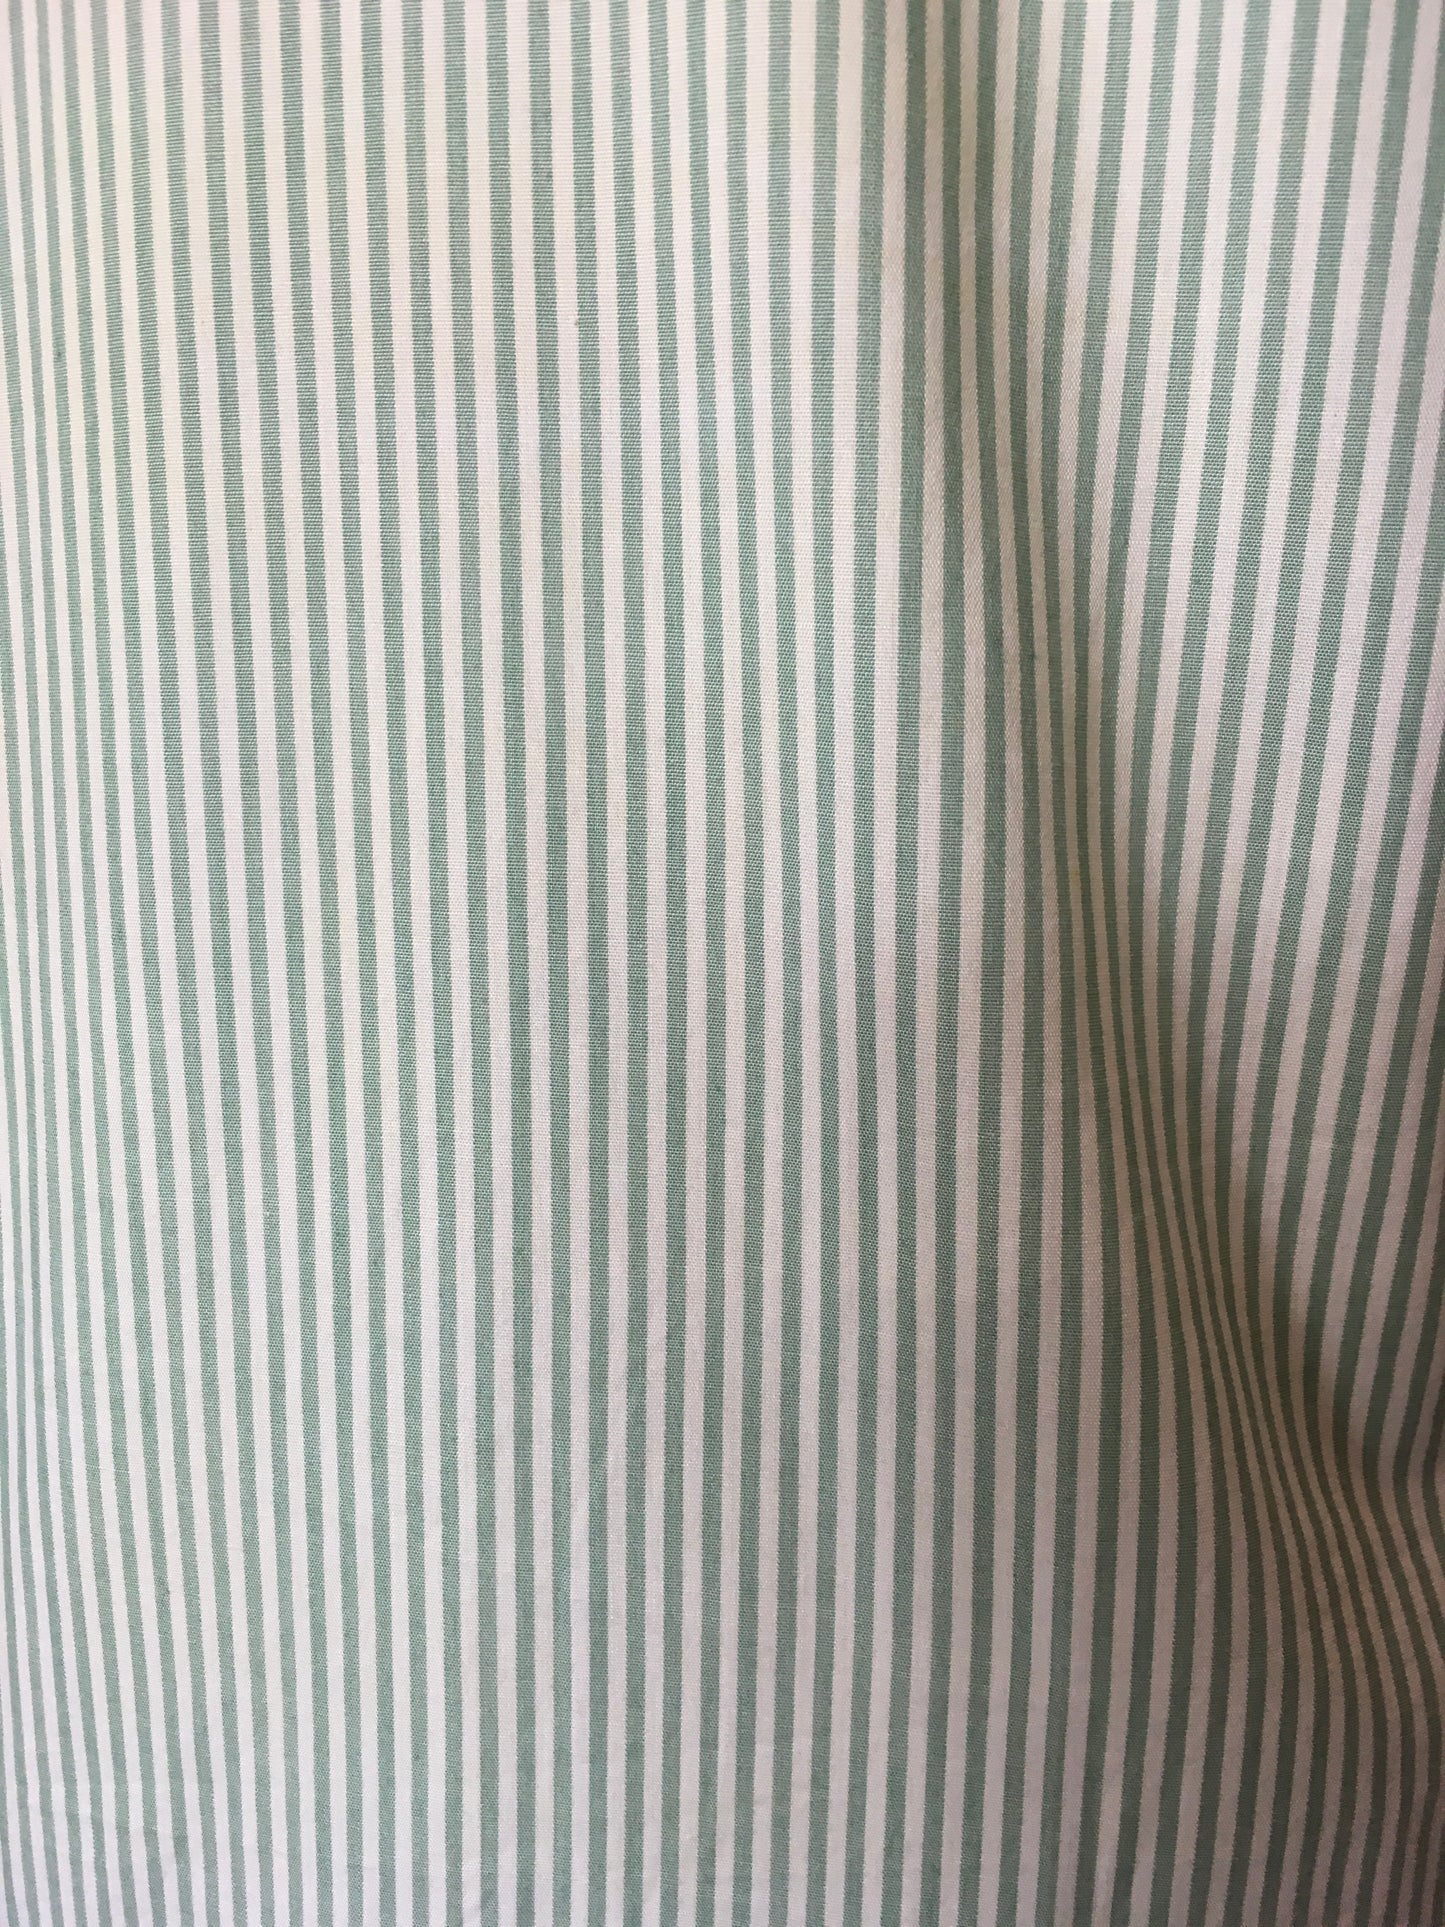 Original Gents Collarless Shirt with Double Cuff - In a Lovely Green and White Stripe